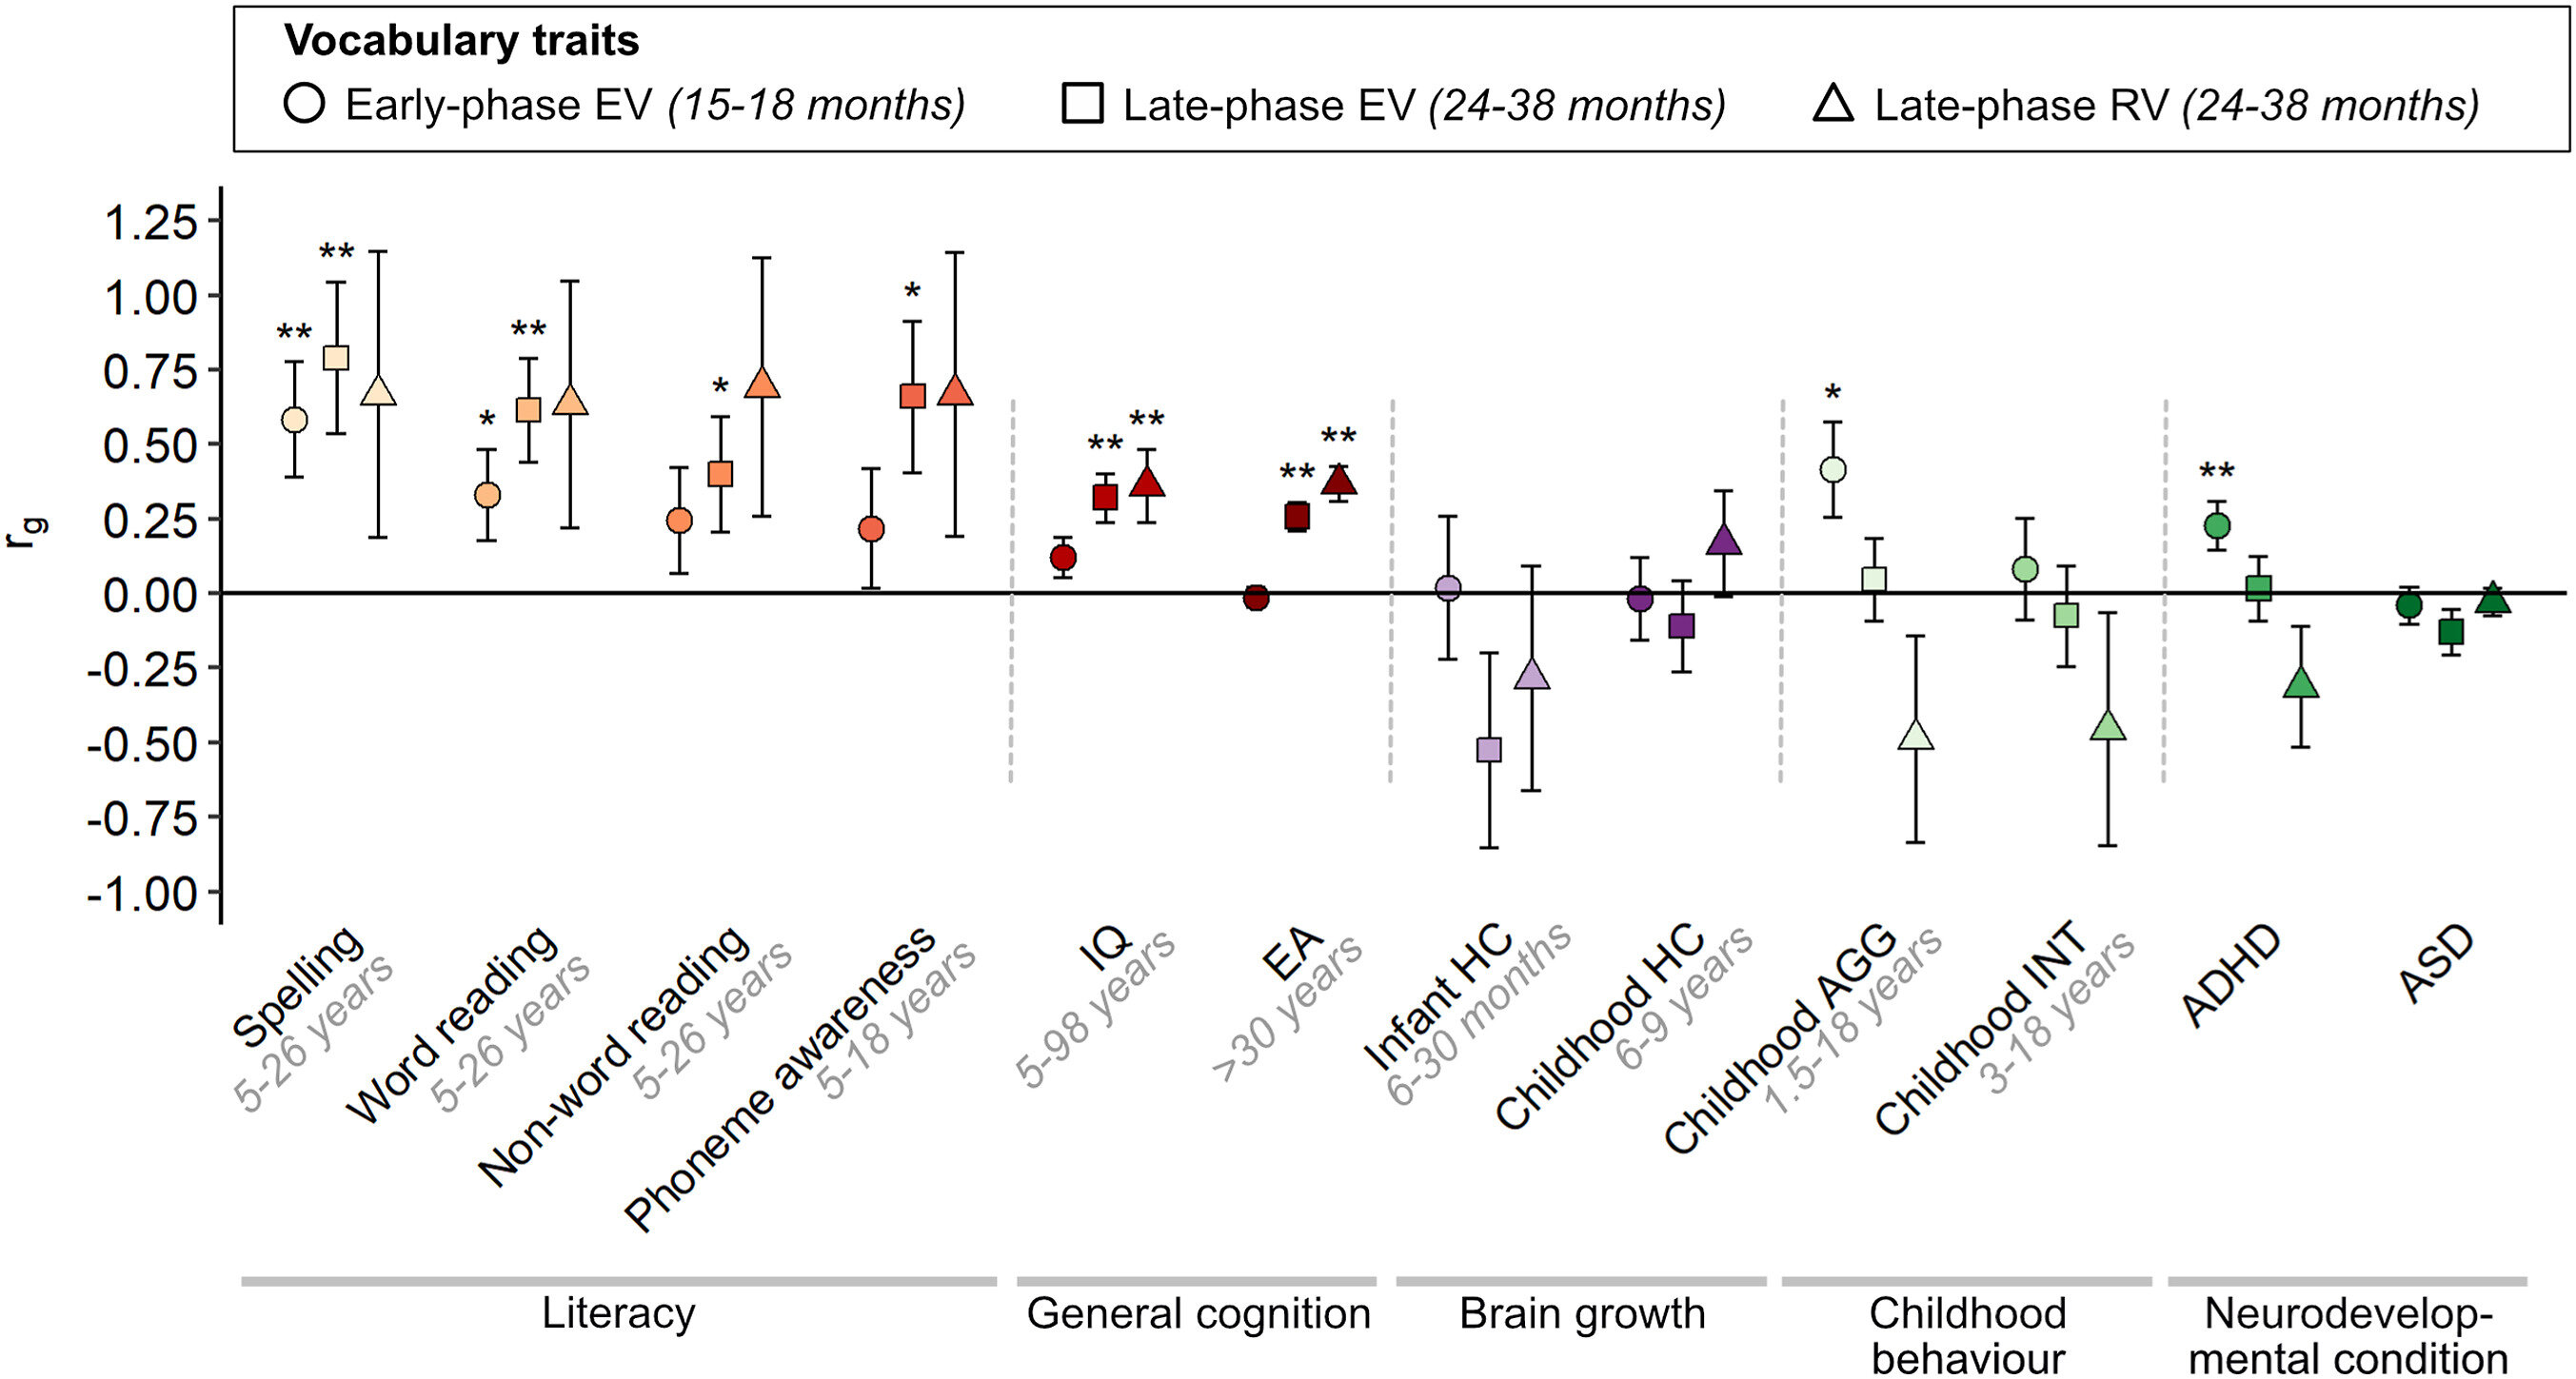 Early vocabulary size is genetically linked to ADHD, literacy, and cognition